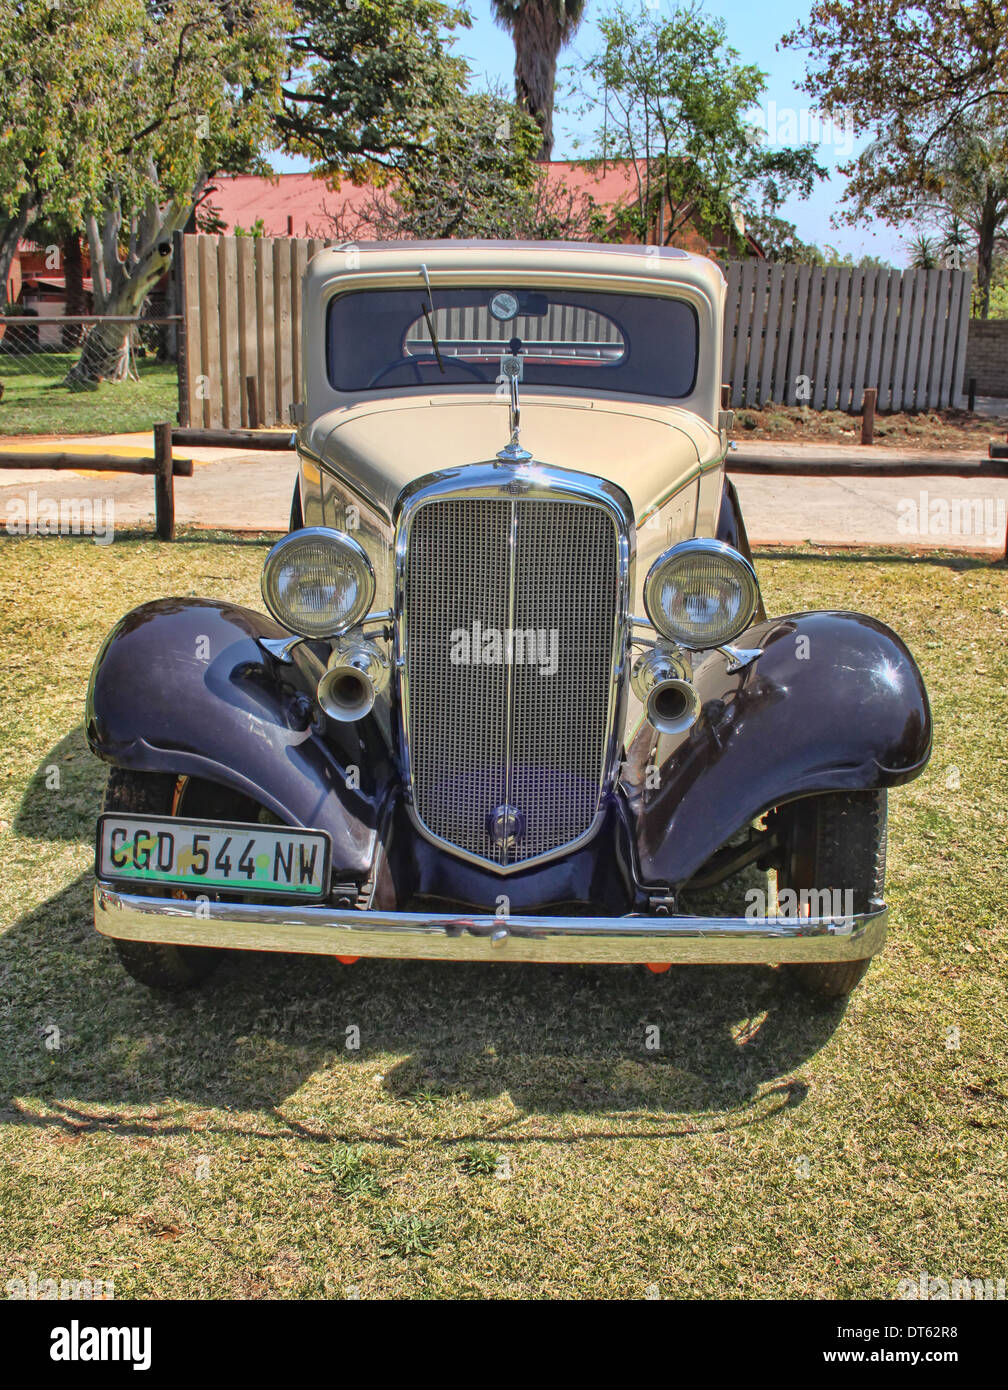 RUSTENBURG, SOUTH AFRICA - SEPTEMBER 9: A beige 1932 Chevrolet Five Window Rumble seat Coupe Stock Photo